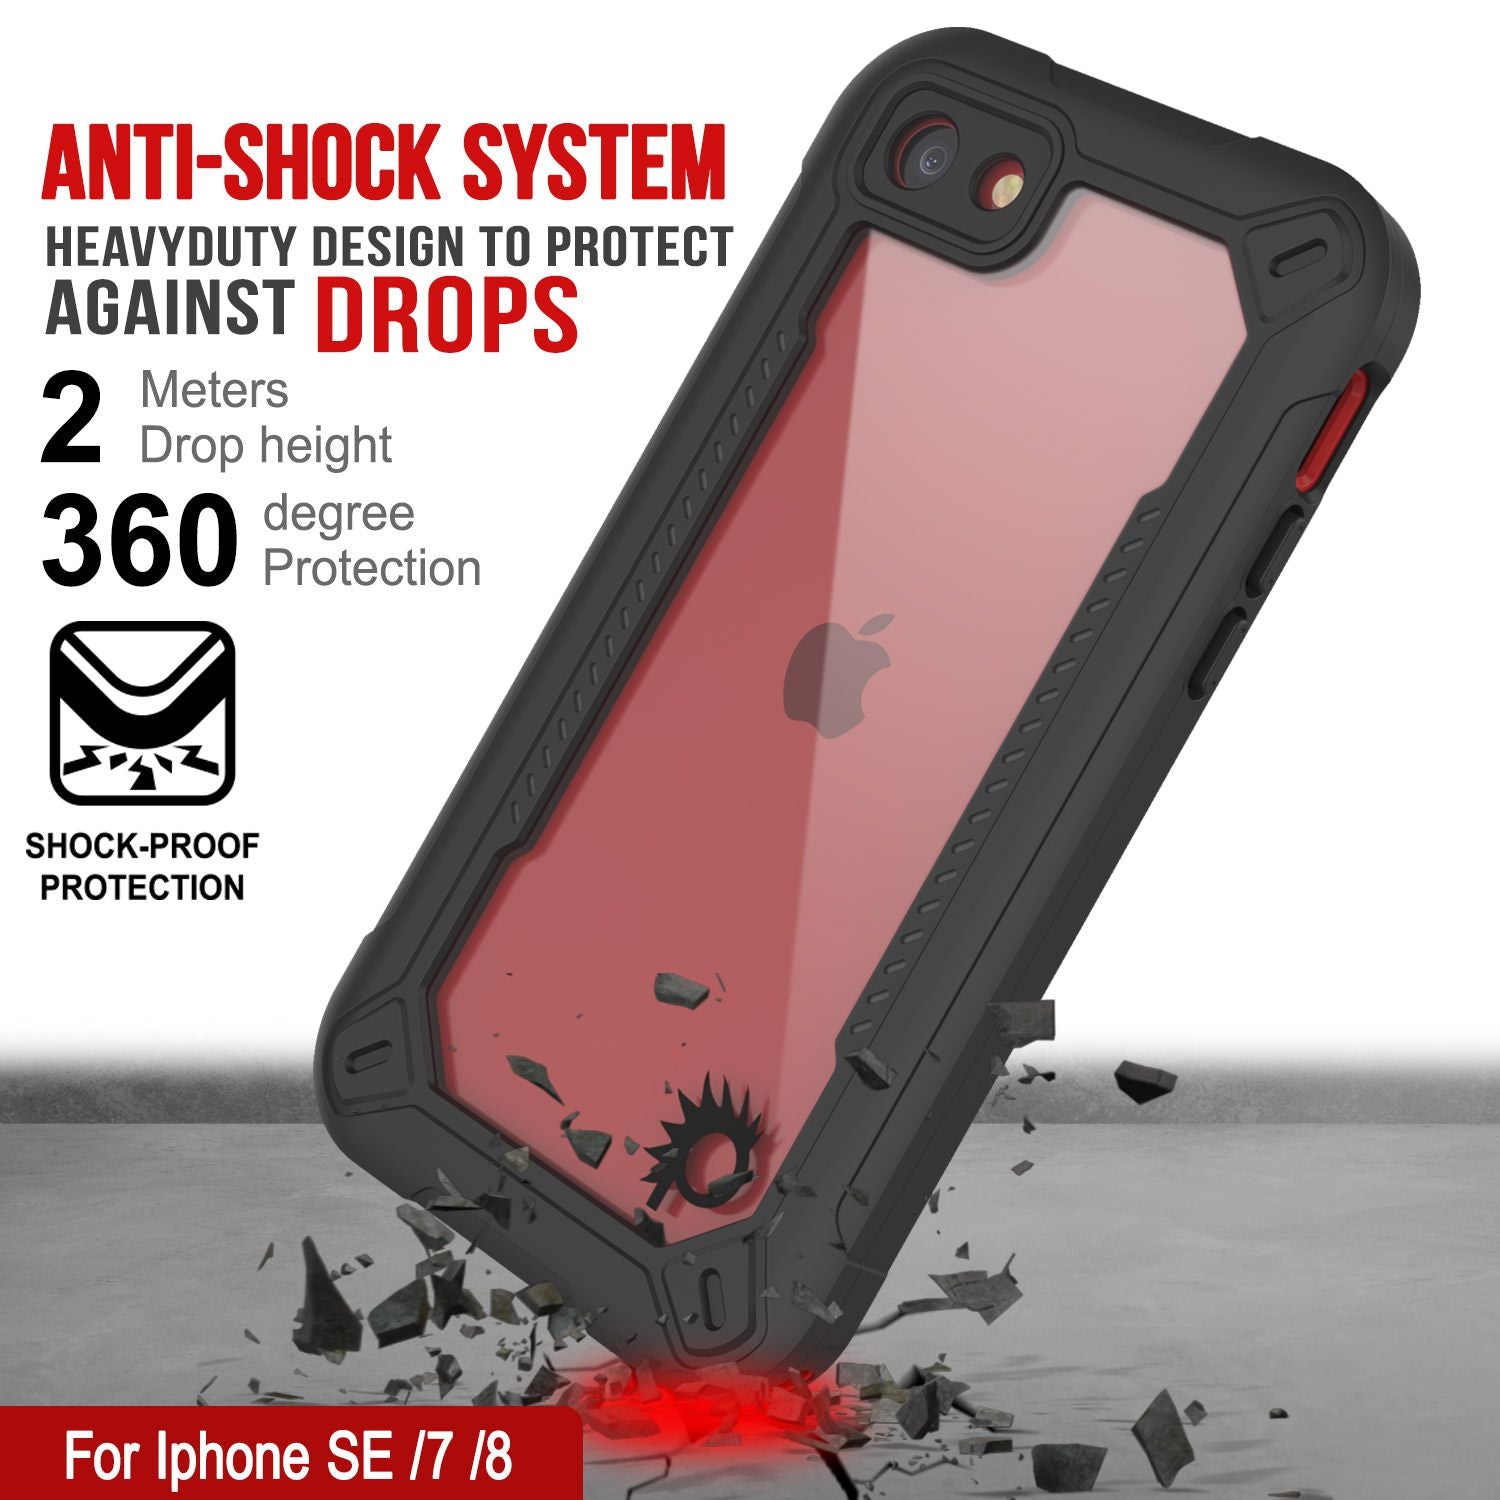 iPhone 8 Waterproof IP68 Case, Punkcase [red]  [Maximus Series] [Slim Fit] [IP68 Certified] [Shockresistant] Clear Armor Cover with Screen Protector | Ultimate Protection